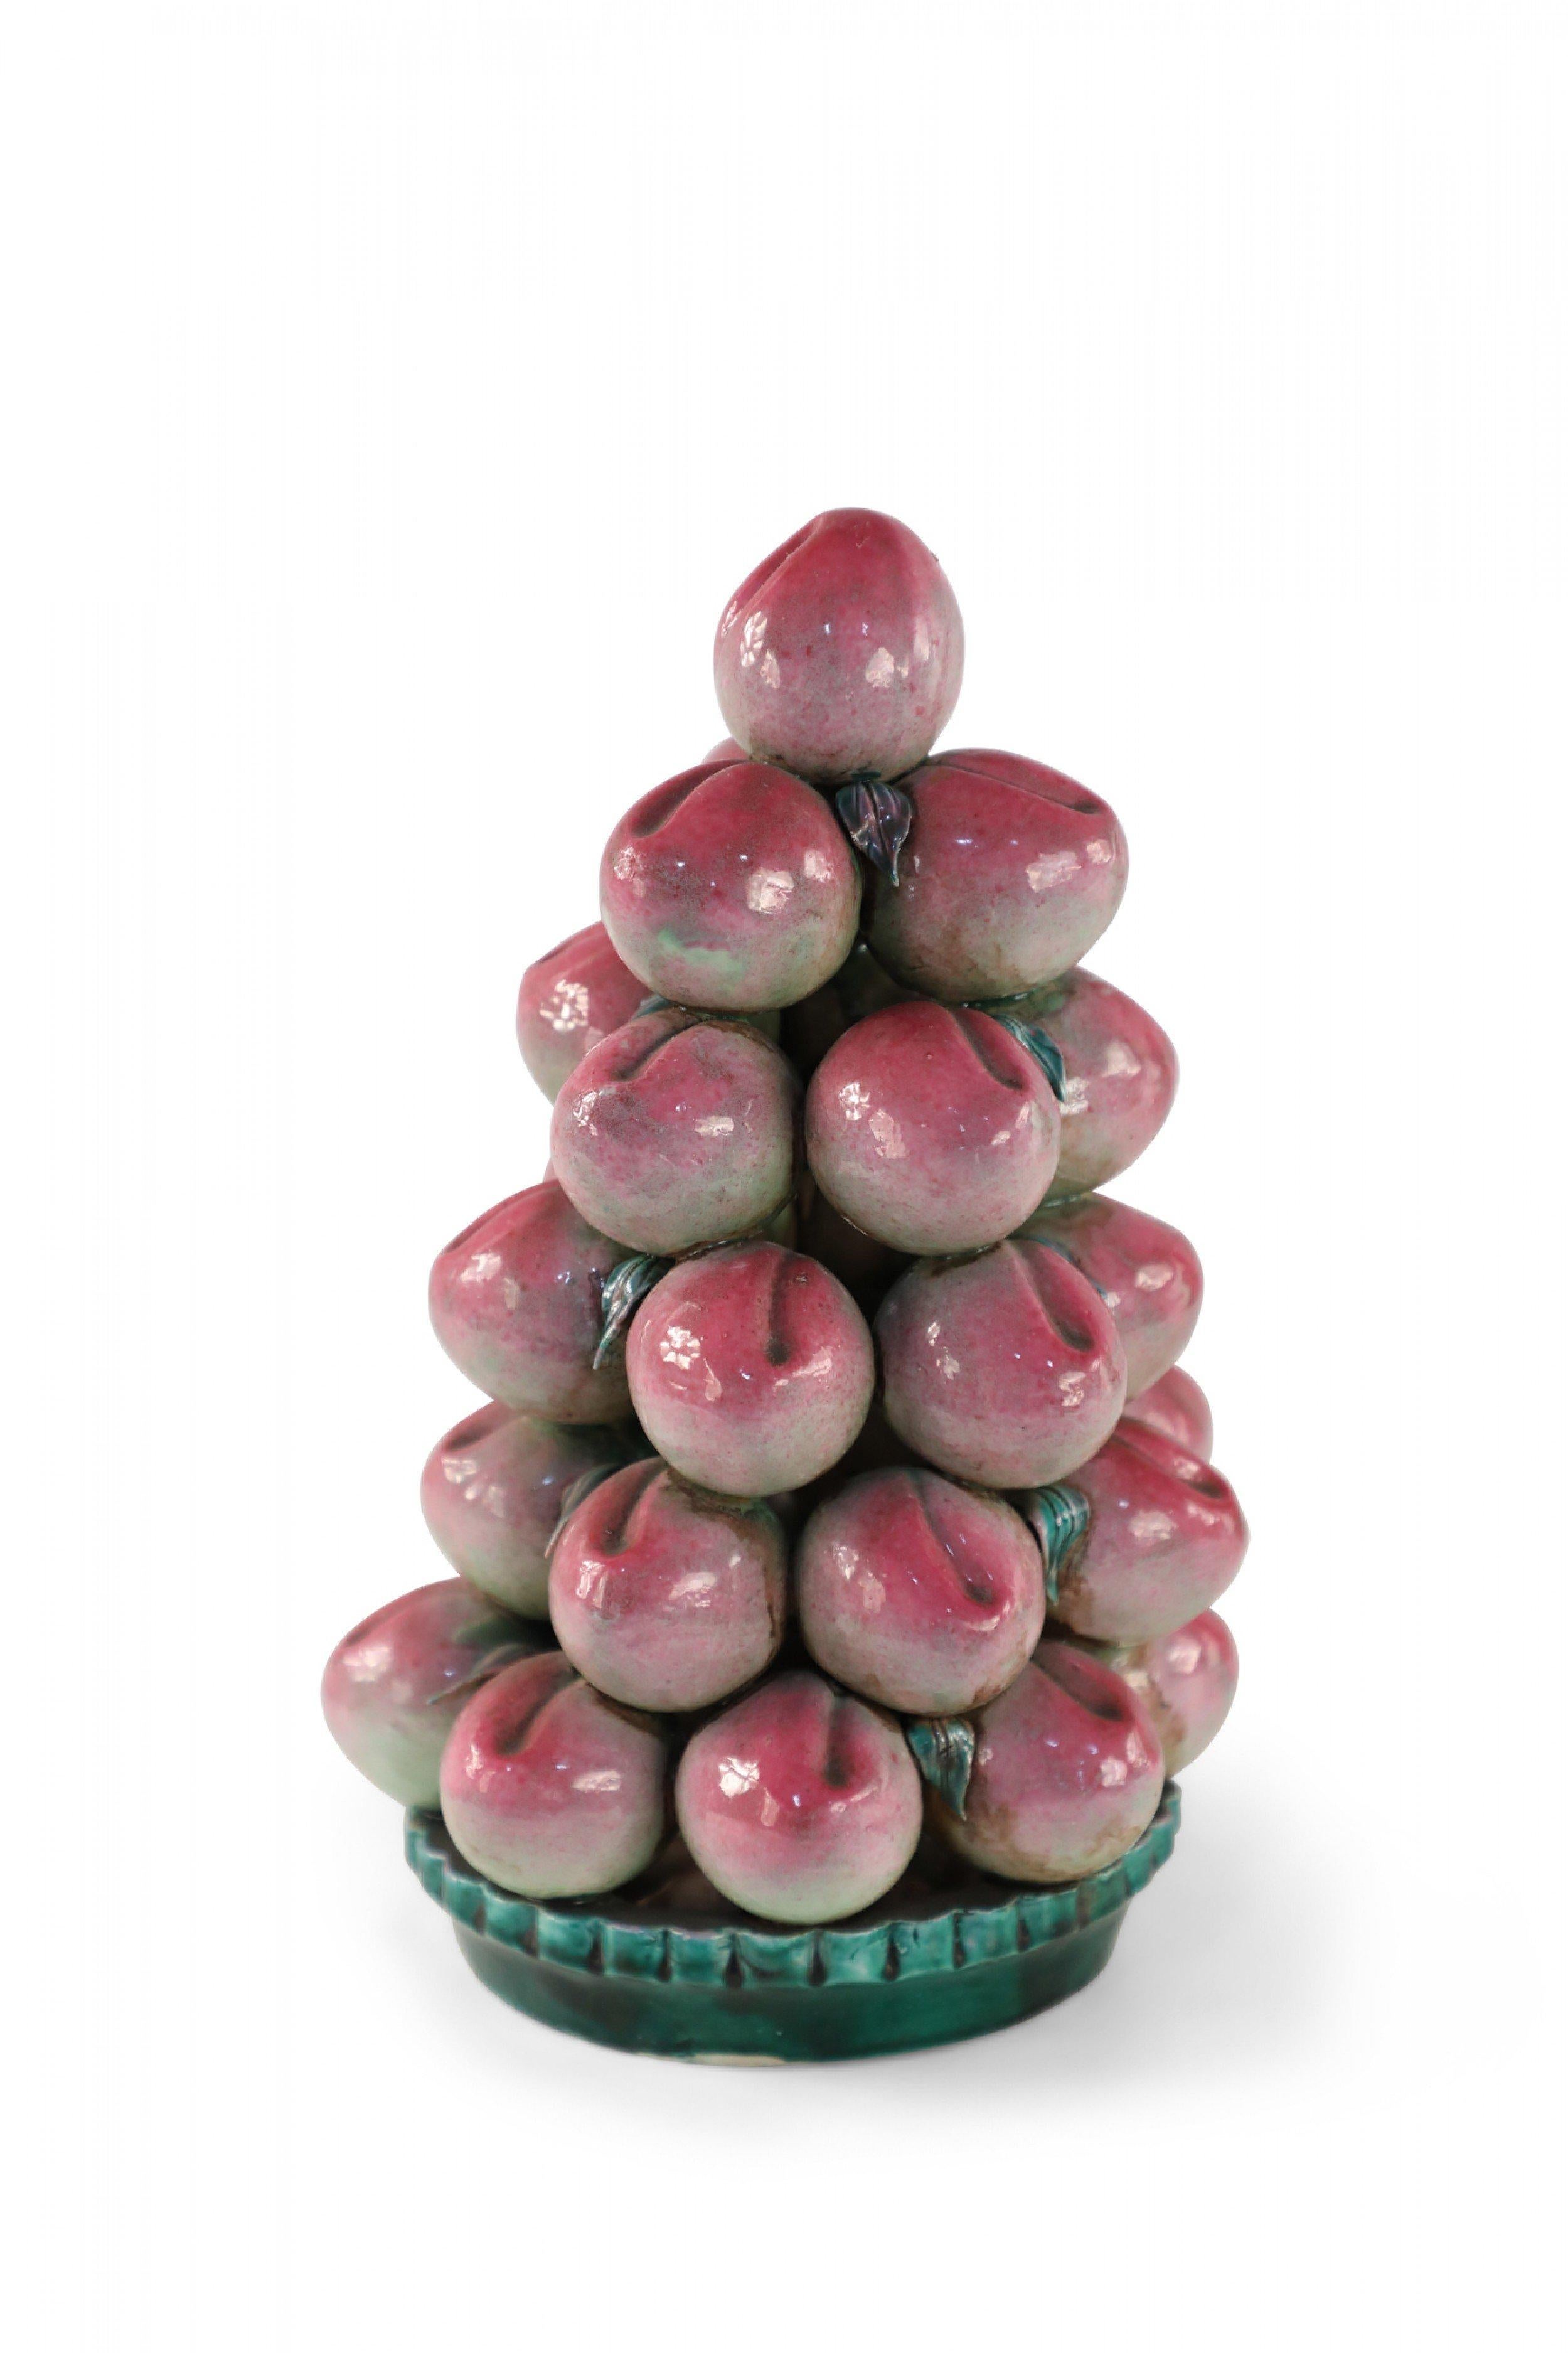 Chinese Export Chinese Porcelain Peach Altar Tribute Sculpture For Sale